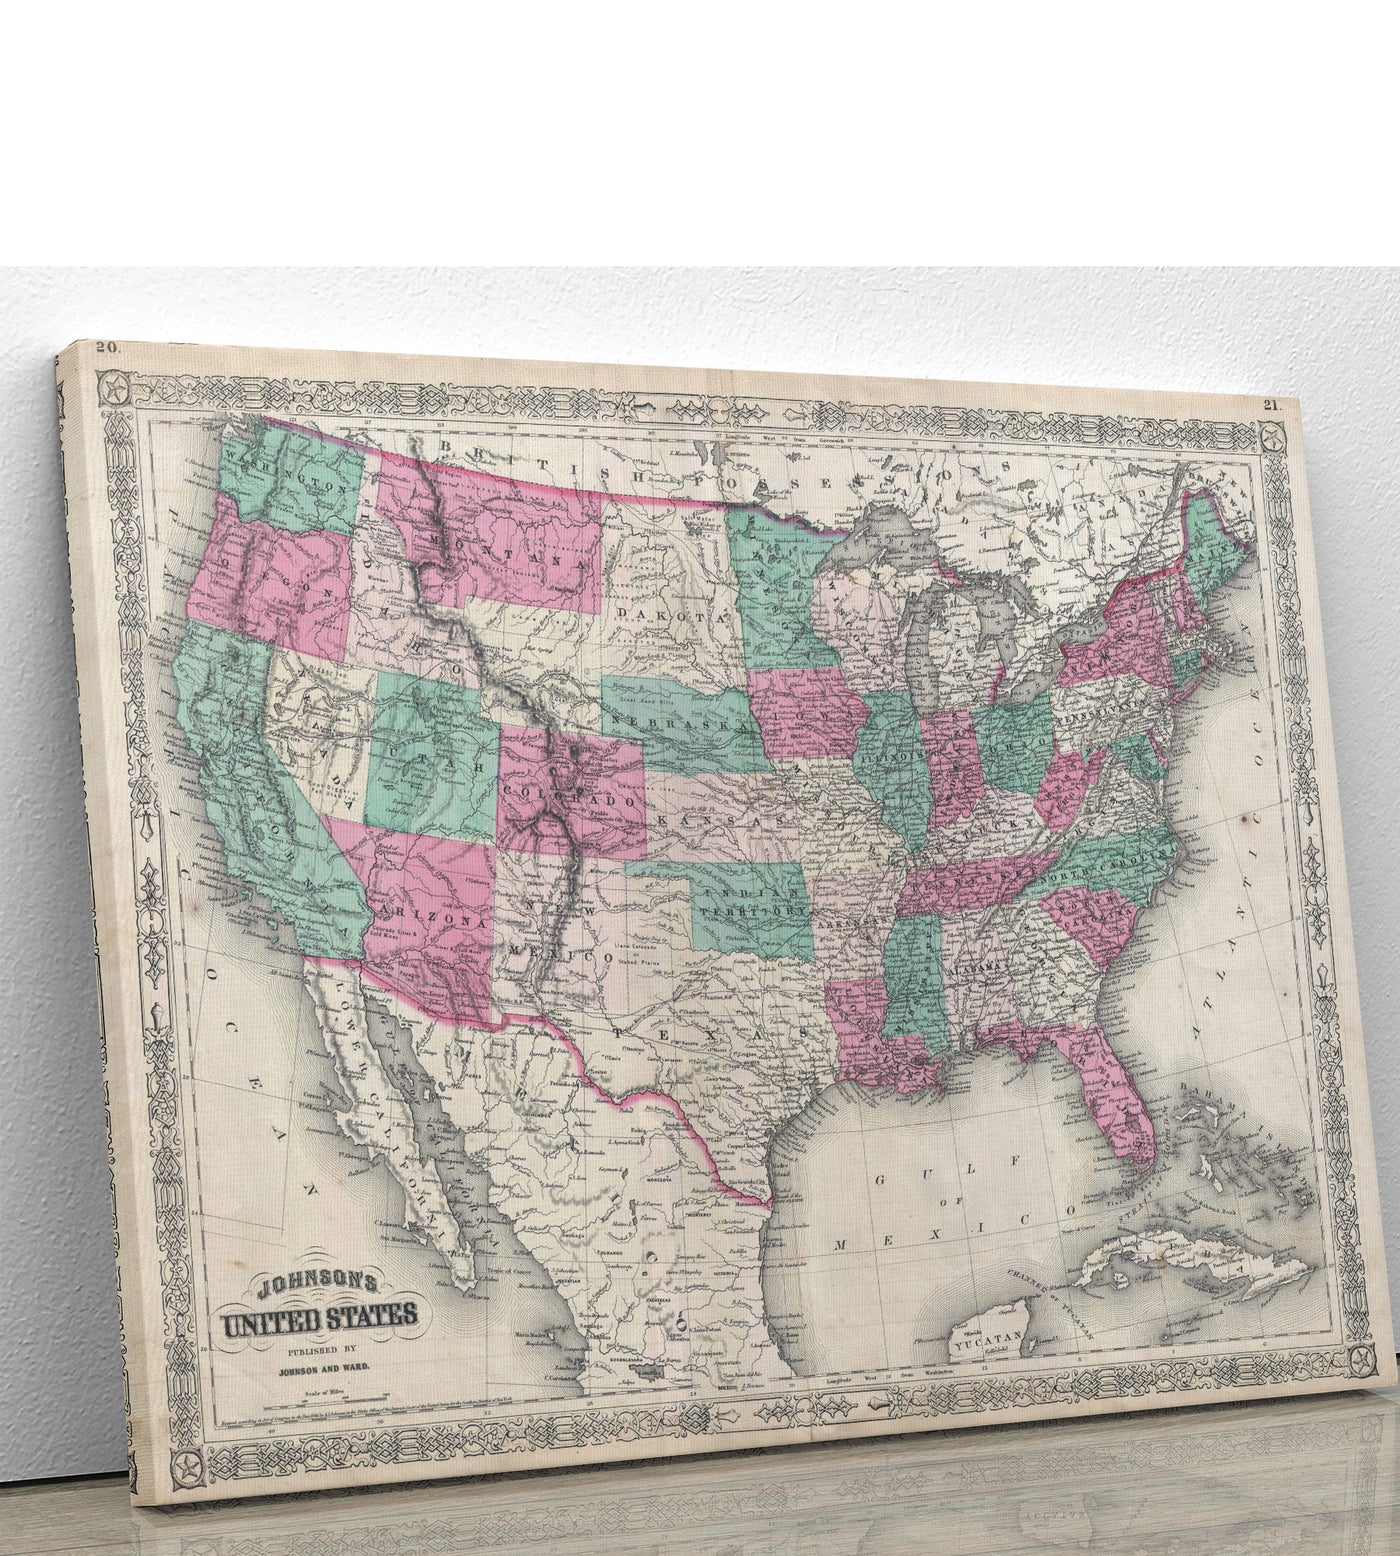 1866 Johnson Map of the United States